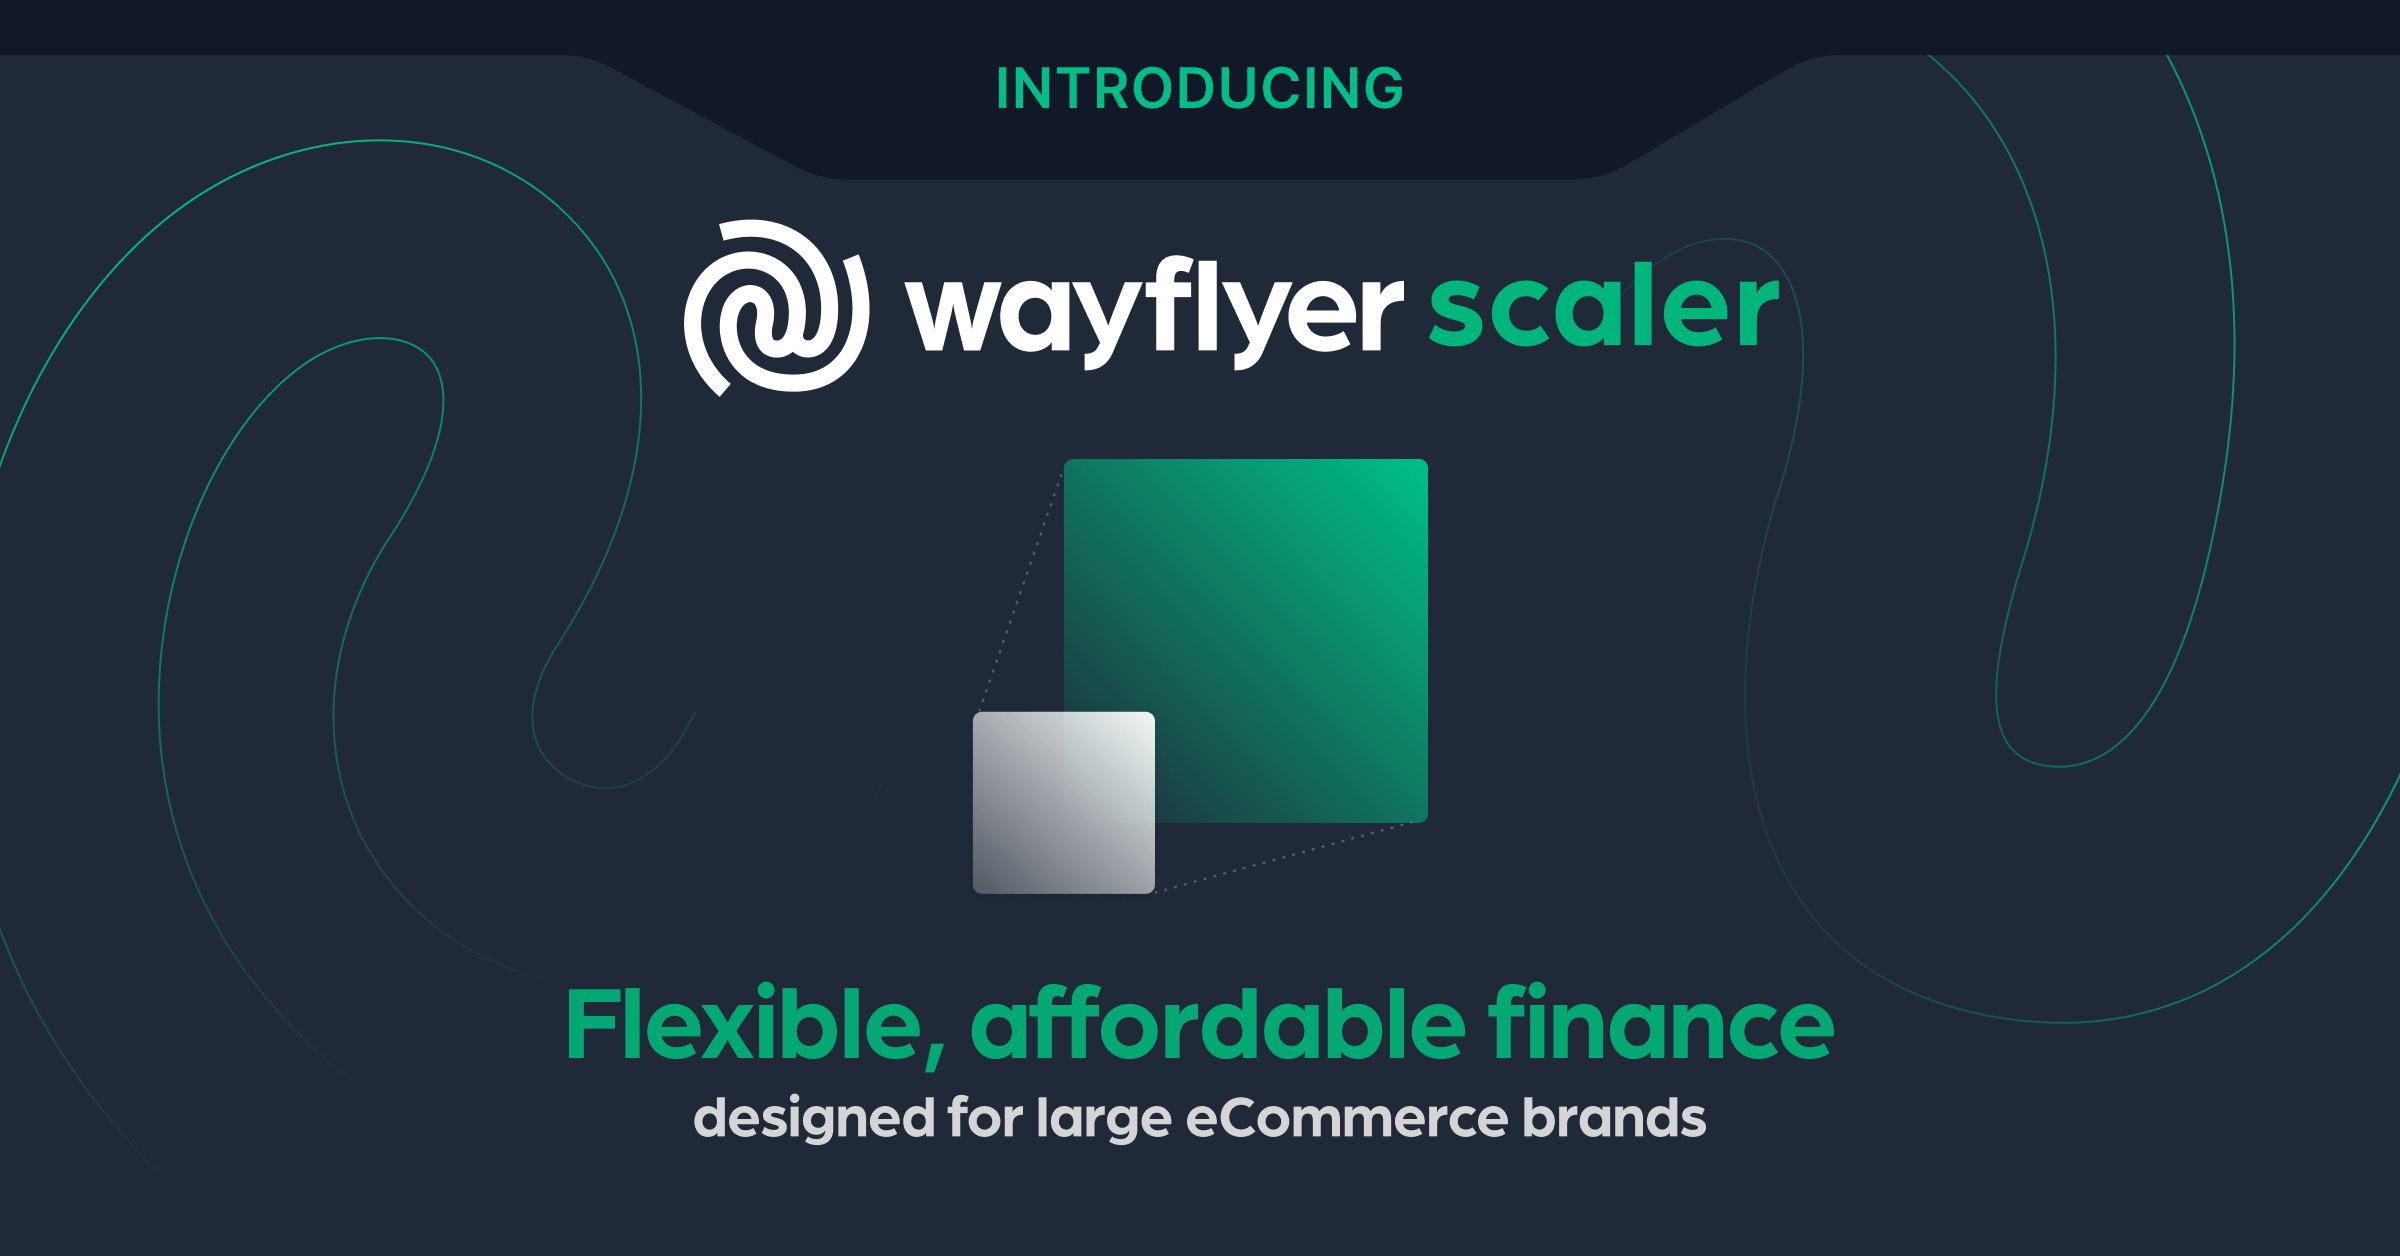 Announcing Wayflyer Scaler: our newest offering to help solve the working capital challenges of large eCommerce businesses